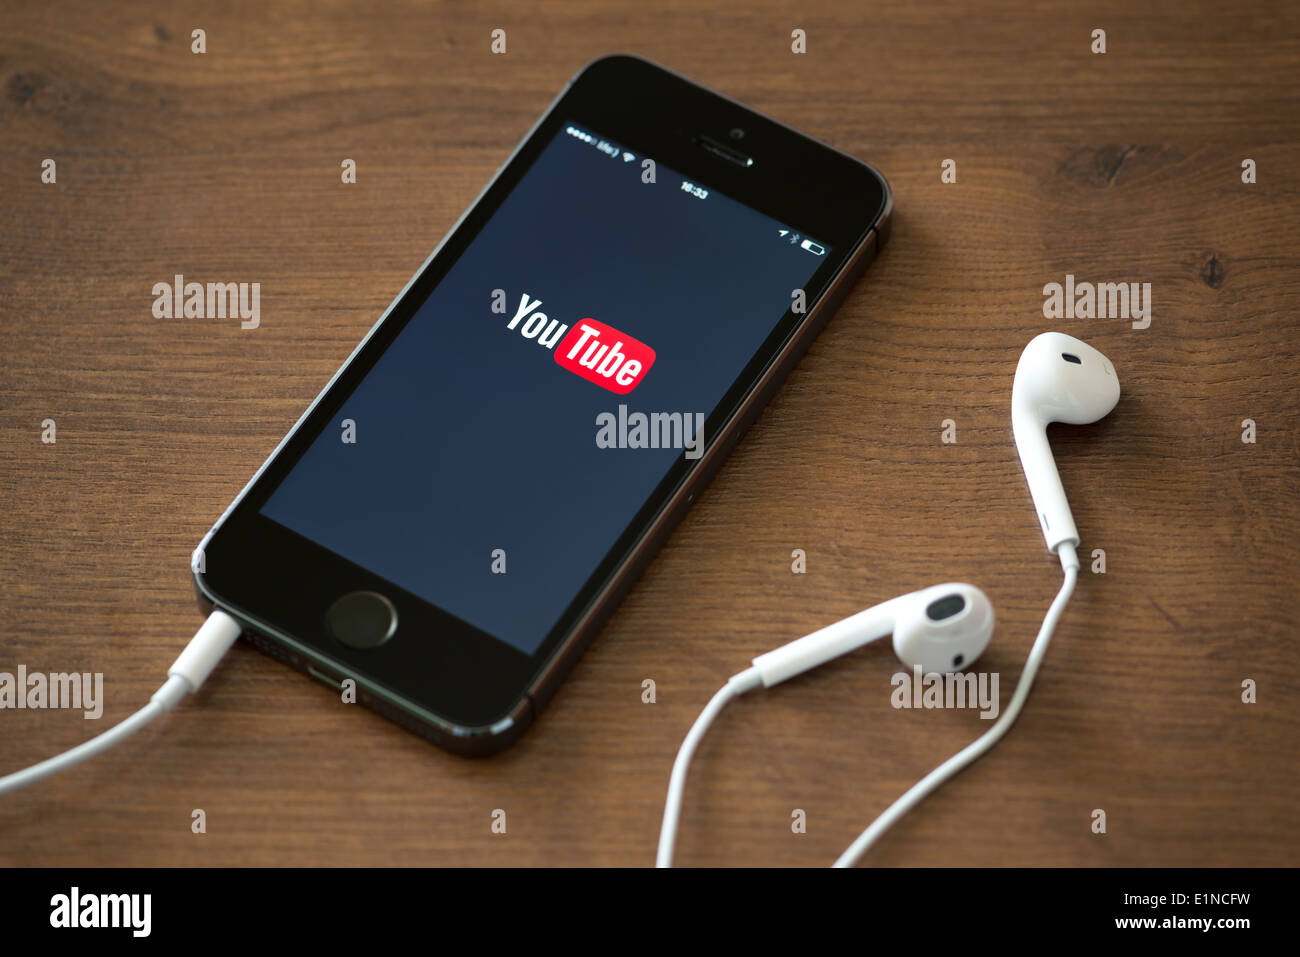 Brand new Apple iPhone 5S with YouTube application service on the screen lying on a desk with headphones. Stock Photo